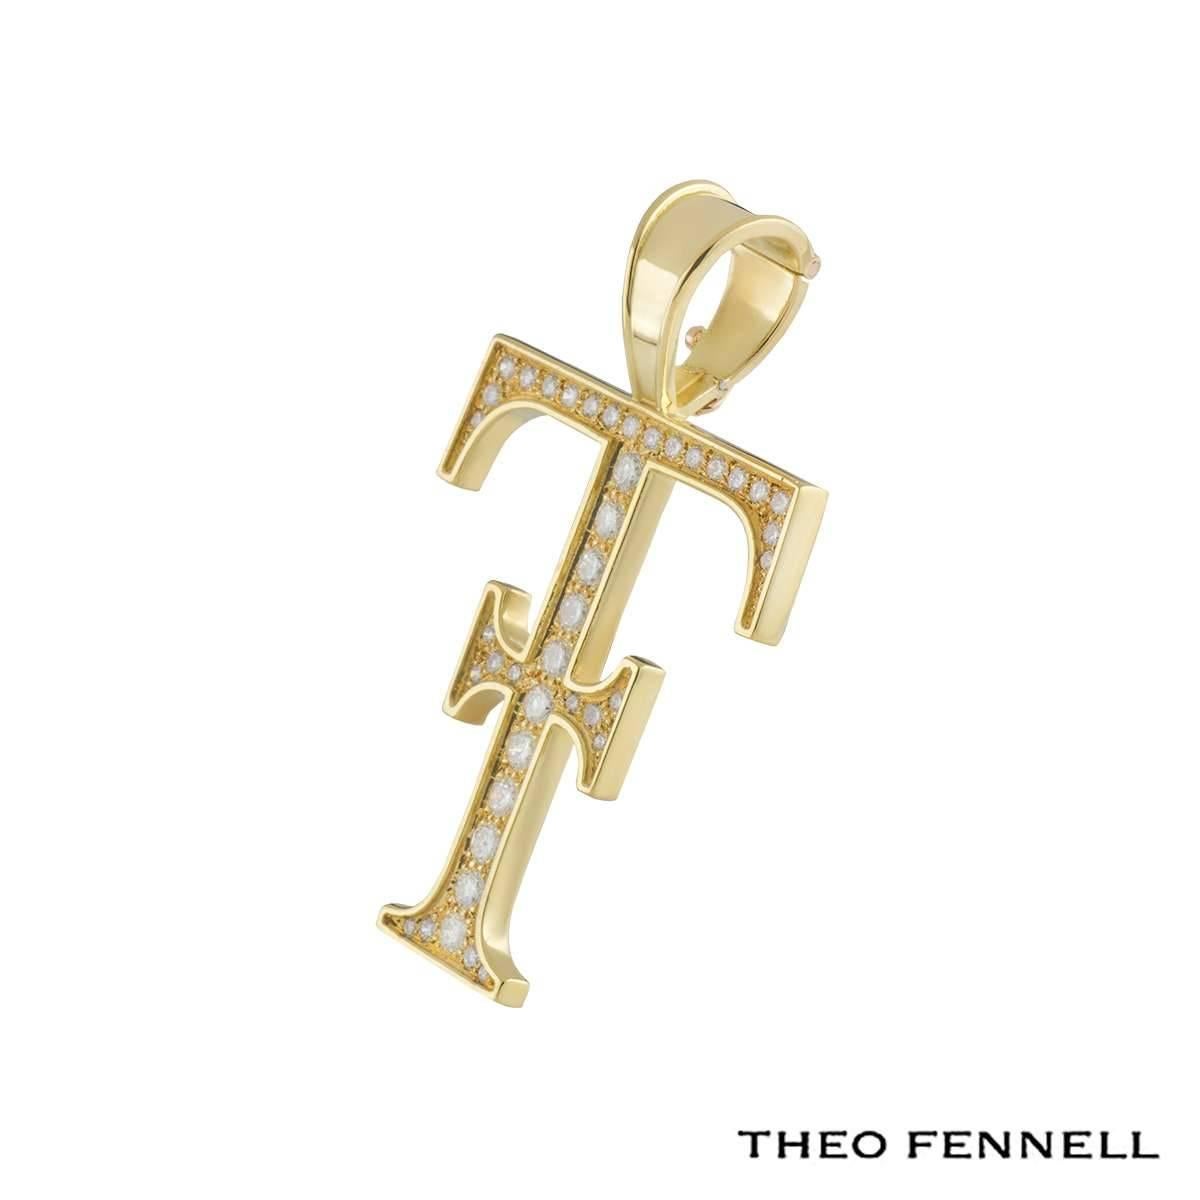 A stunning 18k yellow gold Theo Fennell pendant. The pendant comprises of the Theo Fennell logo motif with 41 round brilliant cut diamonds pave set with a total approximate weight of 1.09ct, G colour and VS clarity. The pendant features a loop bail